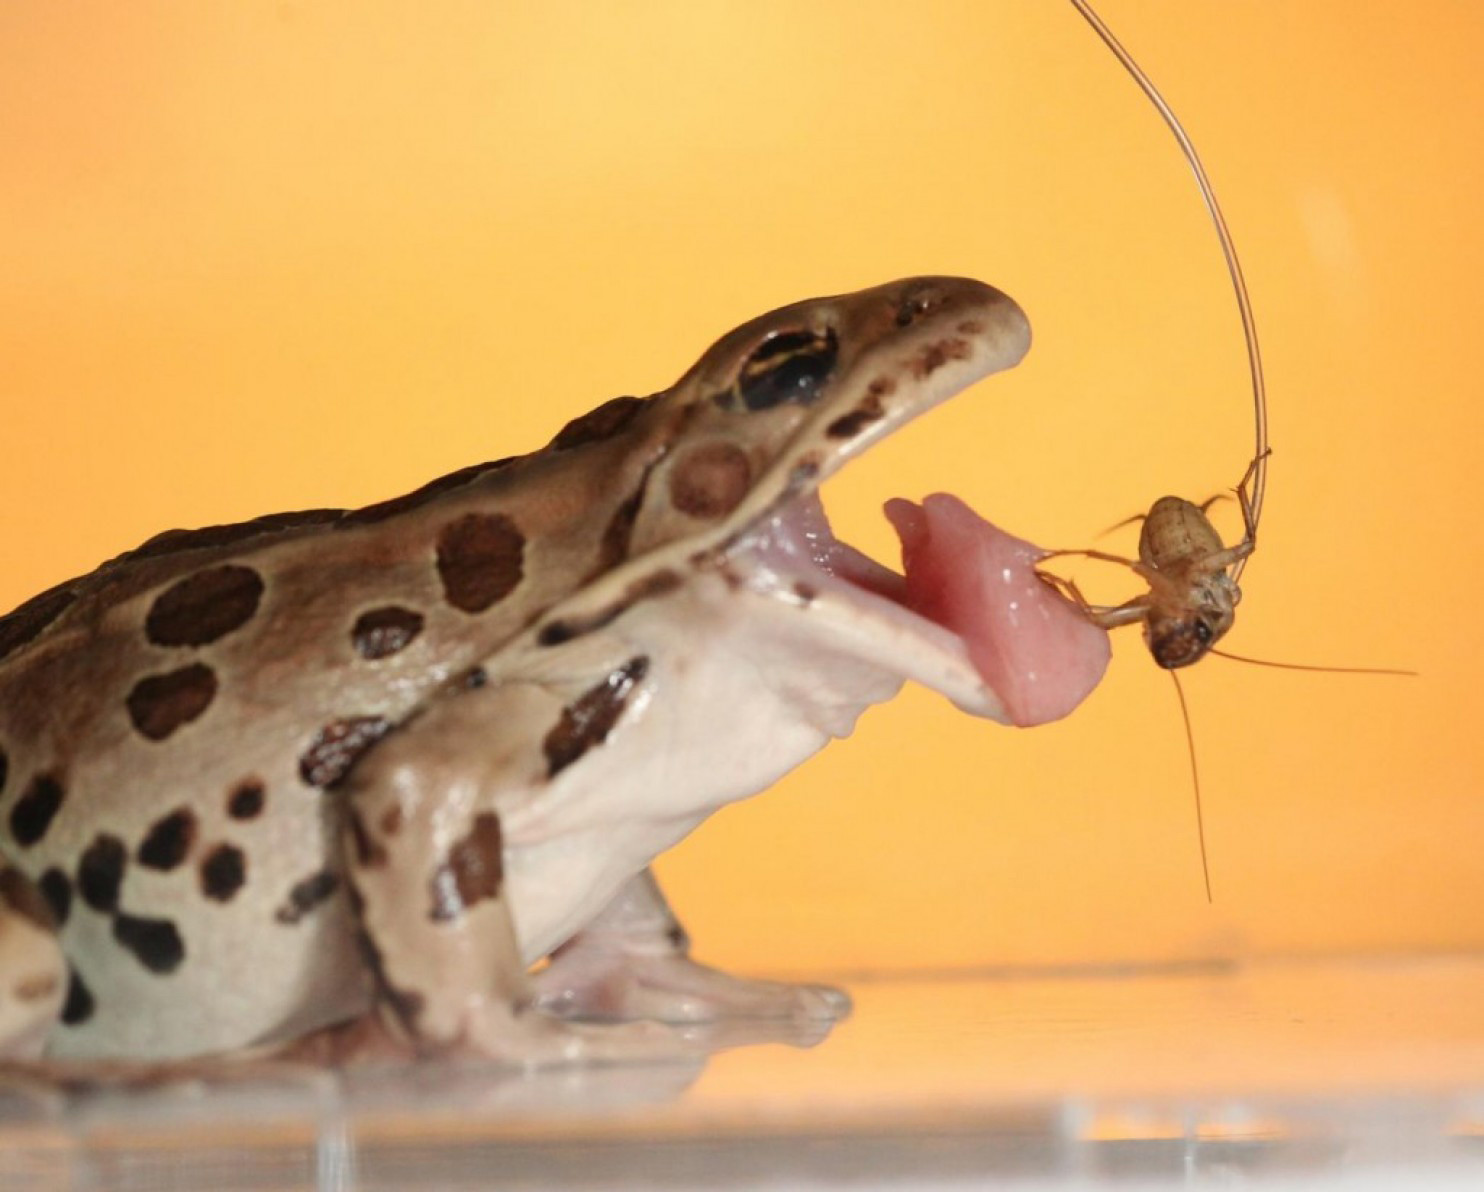 Scientist cracks mystery of the frog's powerful tongue. It's called